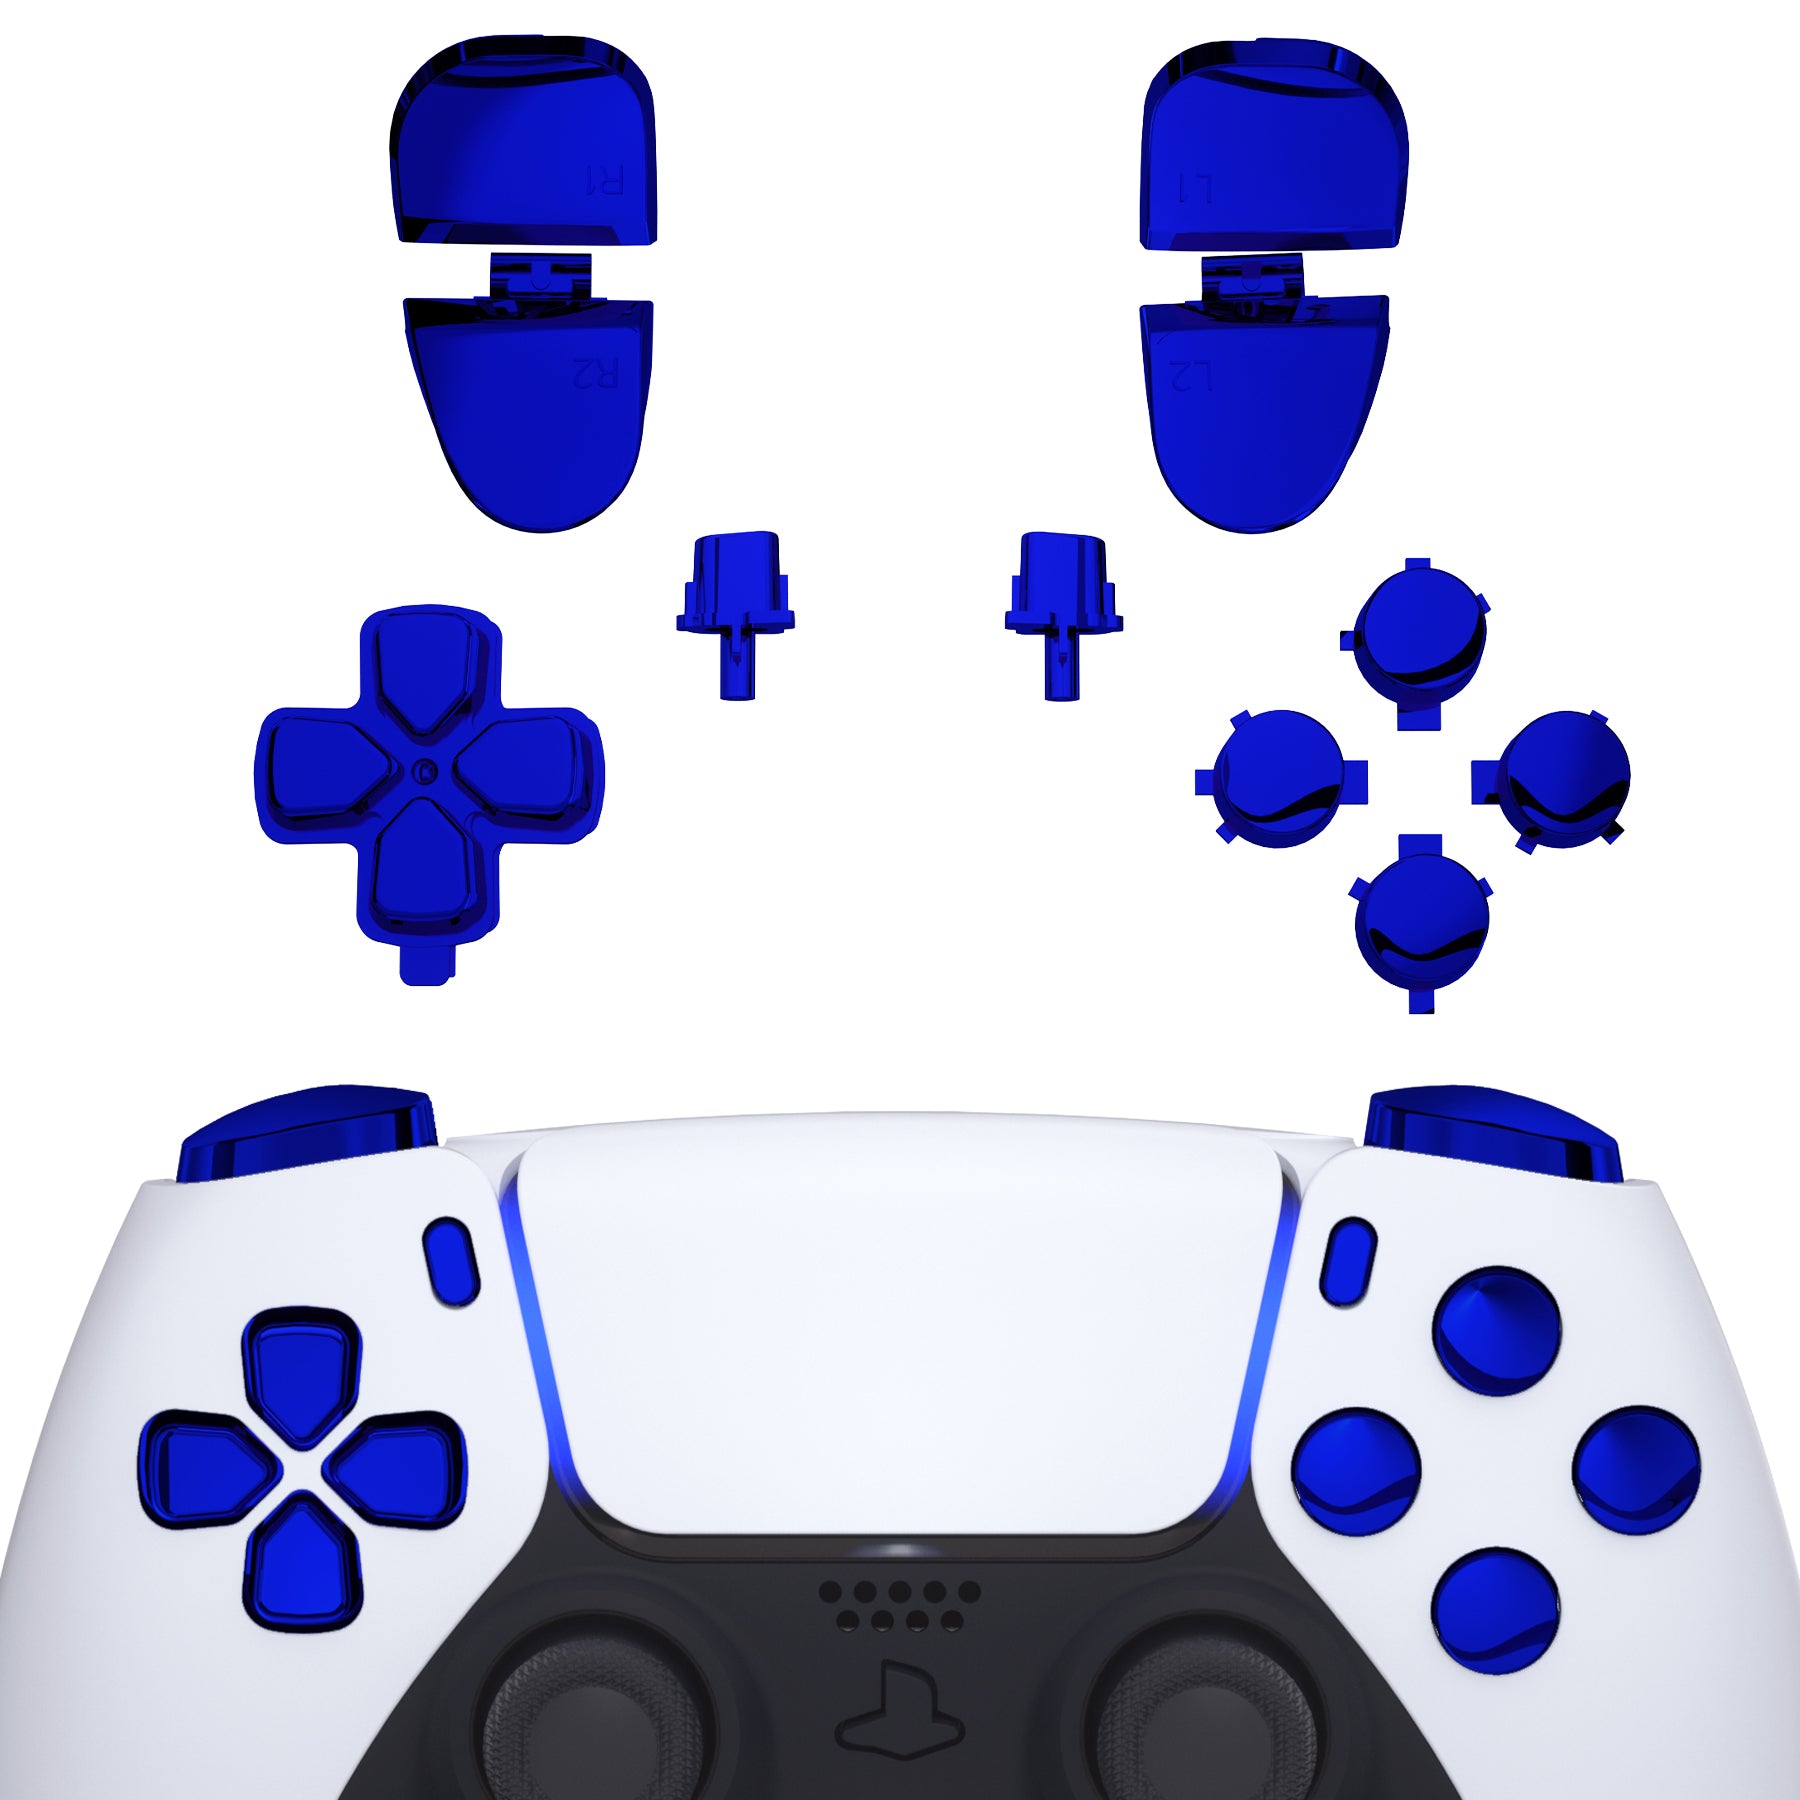 eXtremeRate Retail Replacement D-pad R1 L1 R2 L2 Triggers Share Options Face Buttons, Chrome Blue Full Set Buttons Compatible with ps5 Controller BDM-030 - JPF2004G3